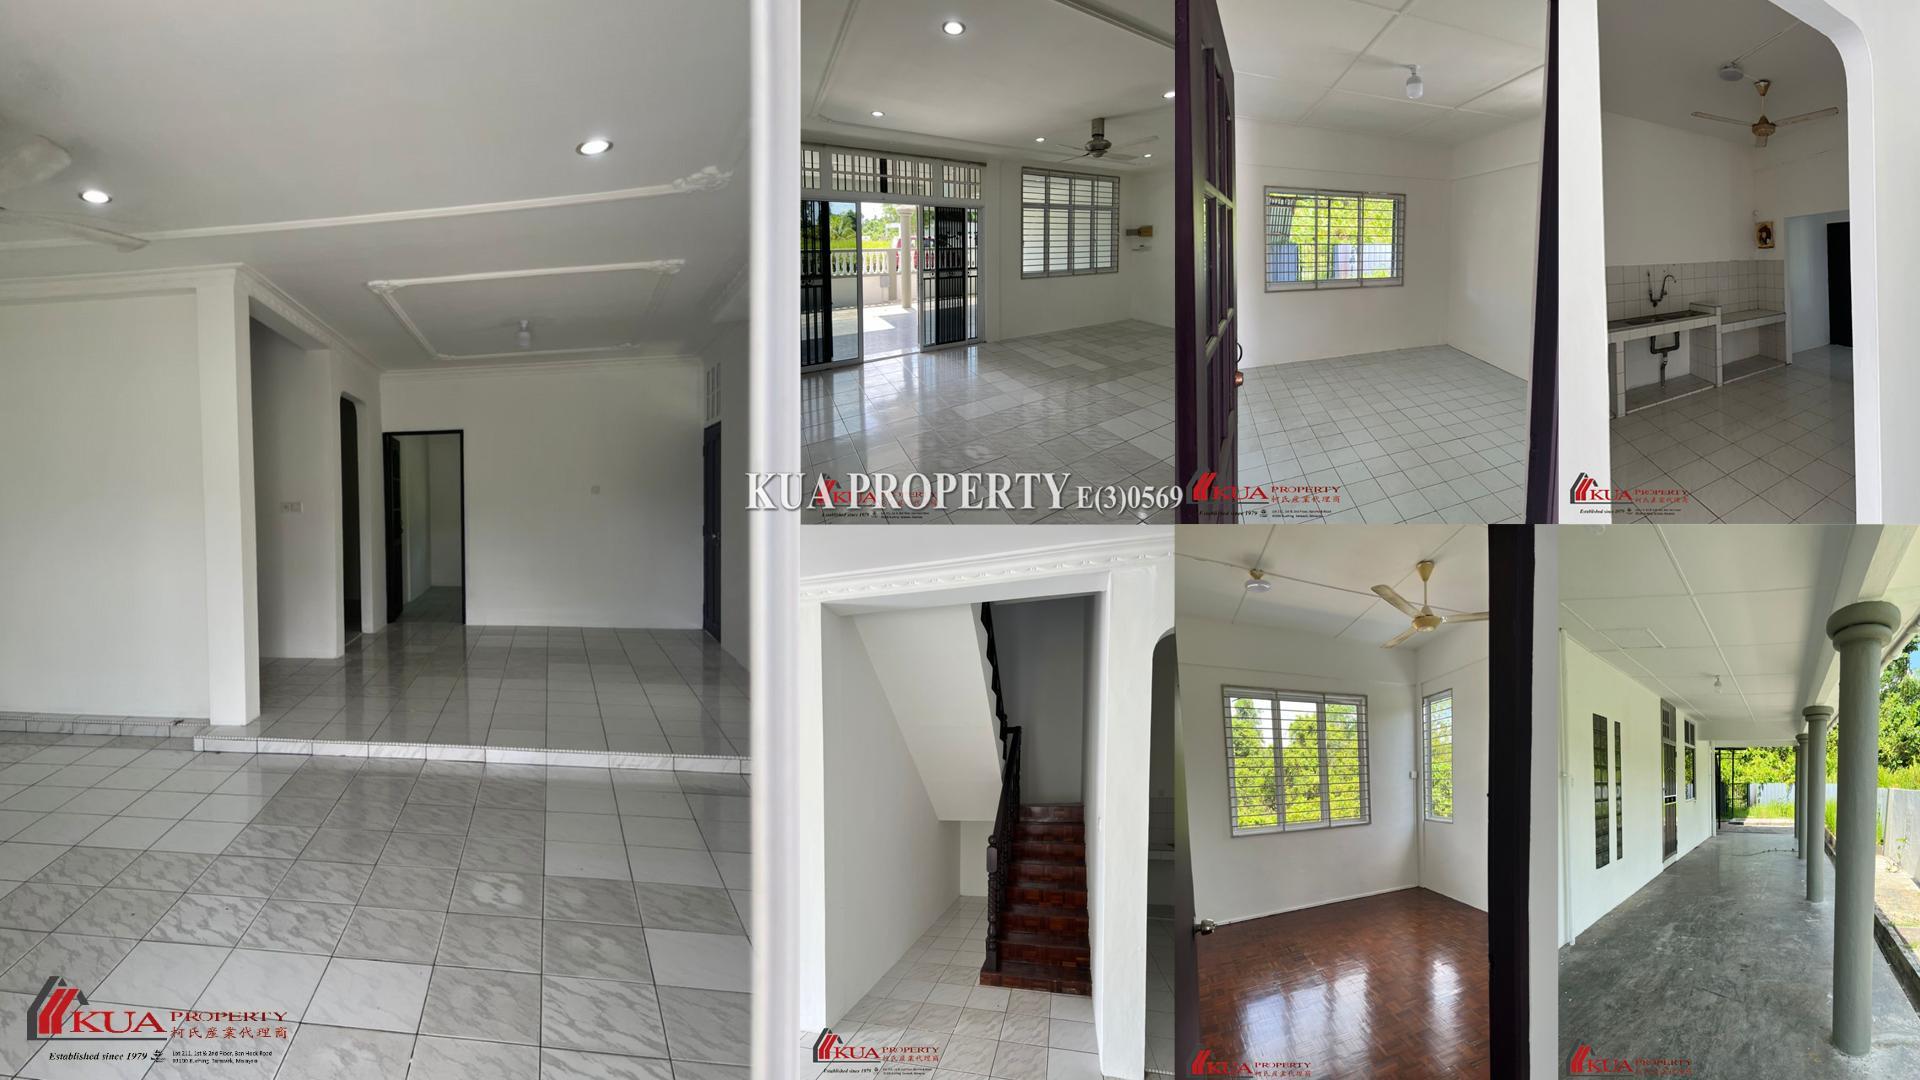 Double Storey Semi-Detached House For Sale! 📍Located at Sungai Maong, Kuching